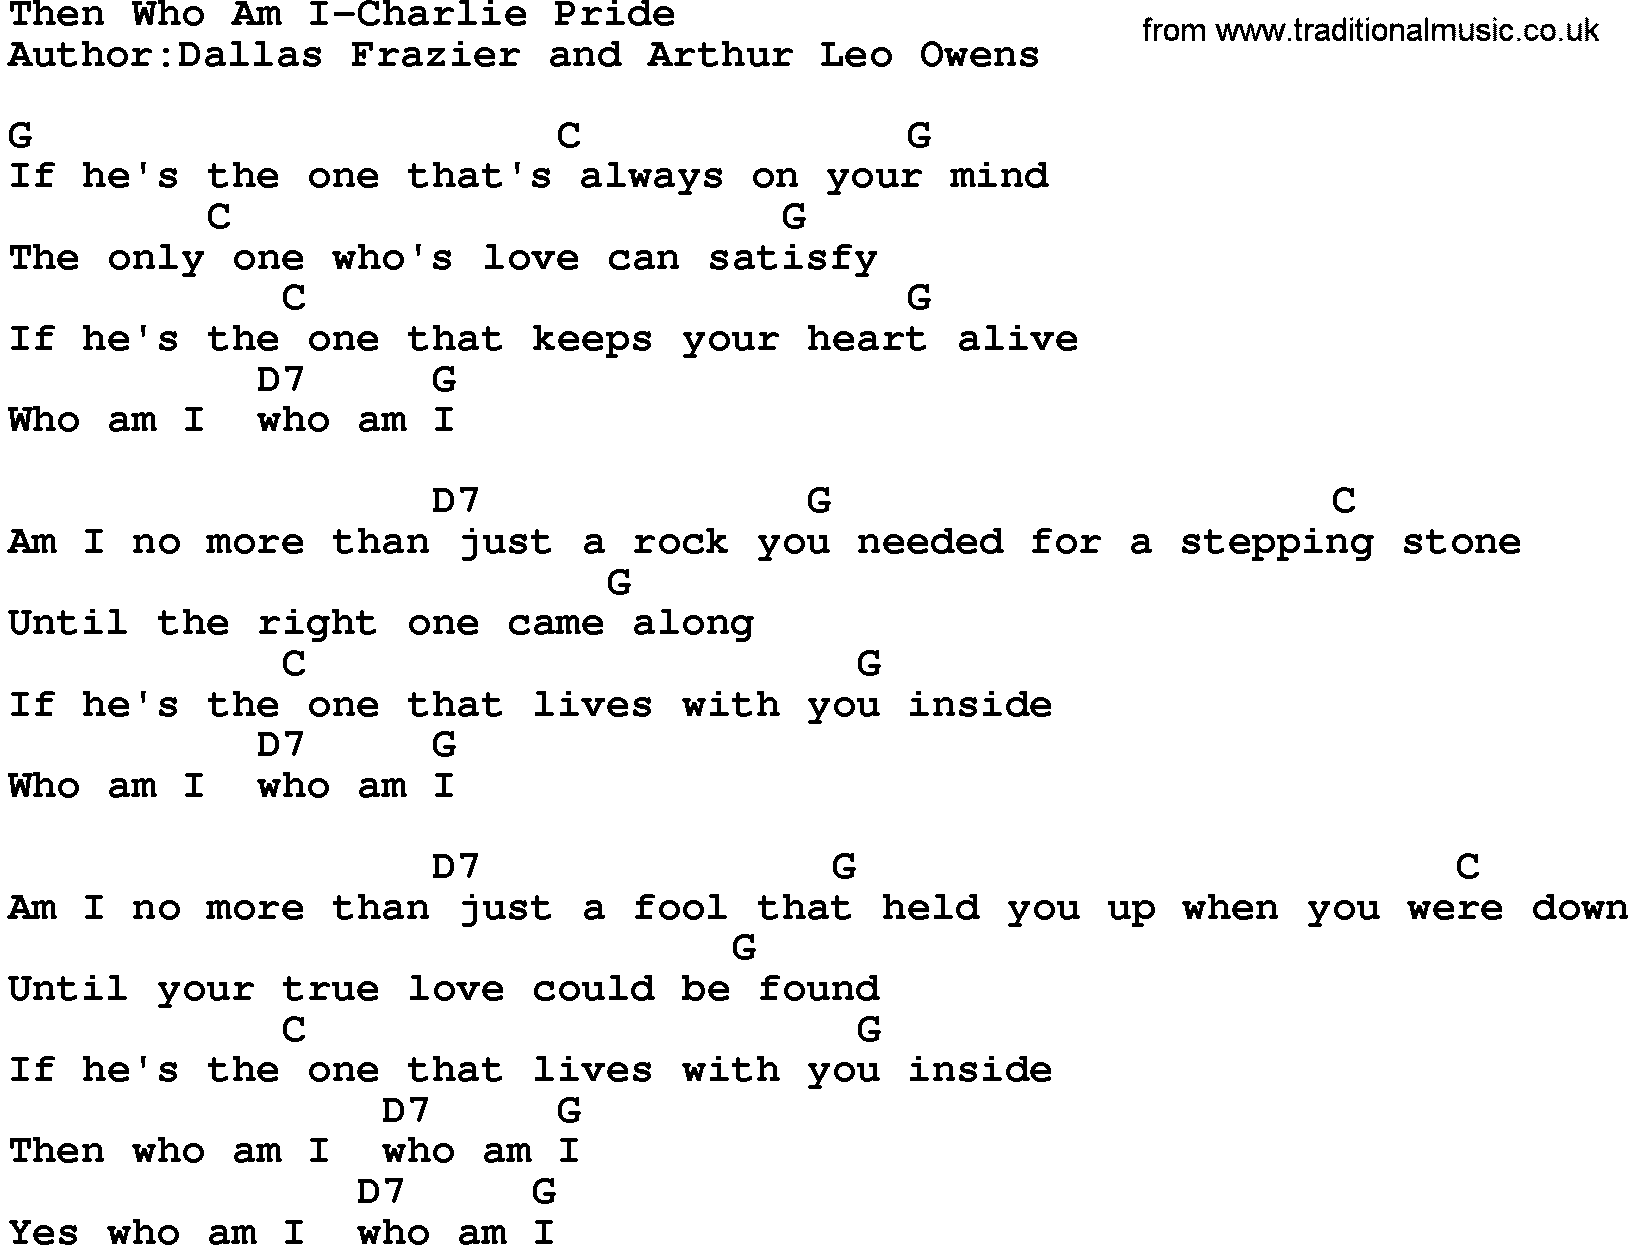 Country music song: Then Who Am I-Charlie Pride lyrics and chords